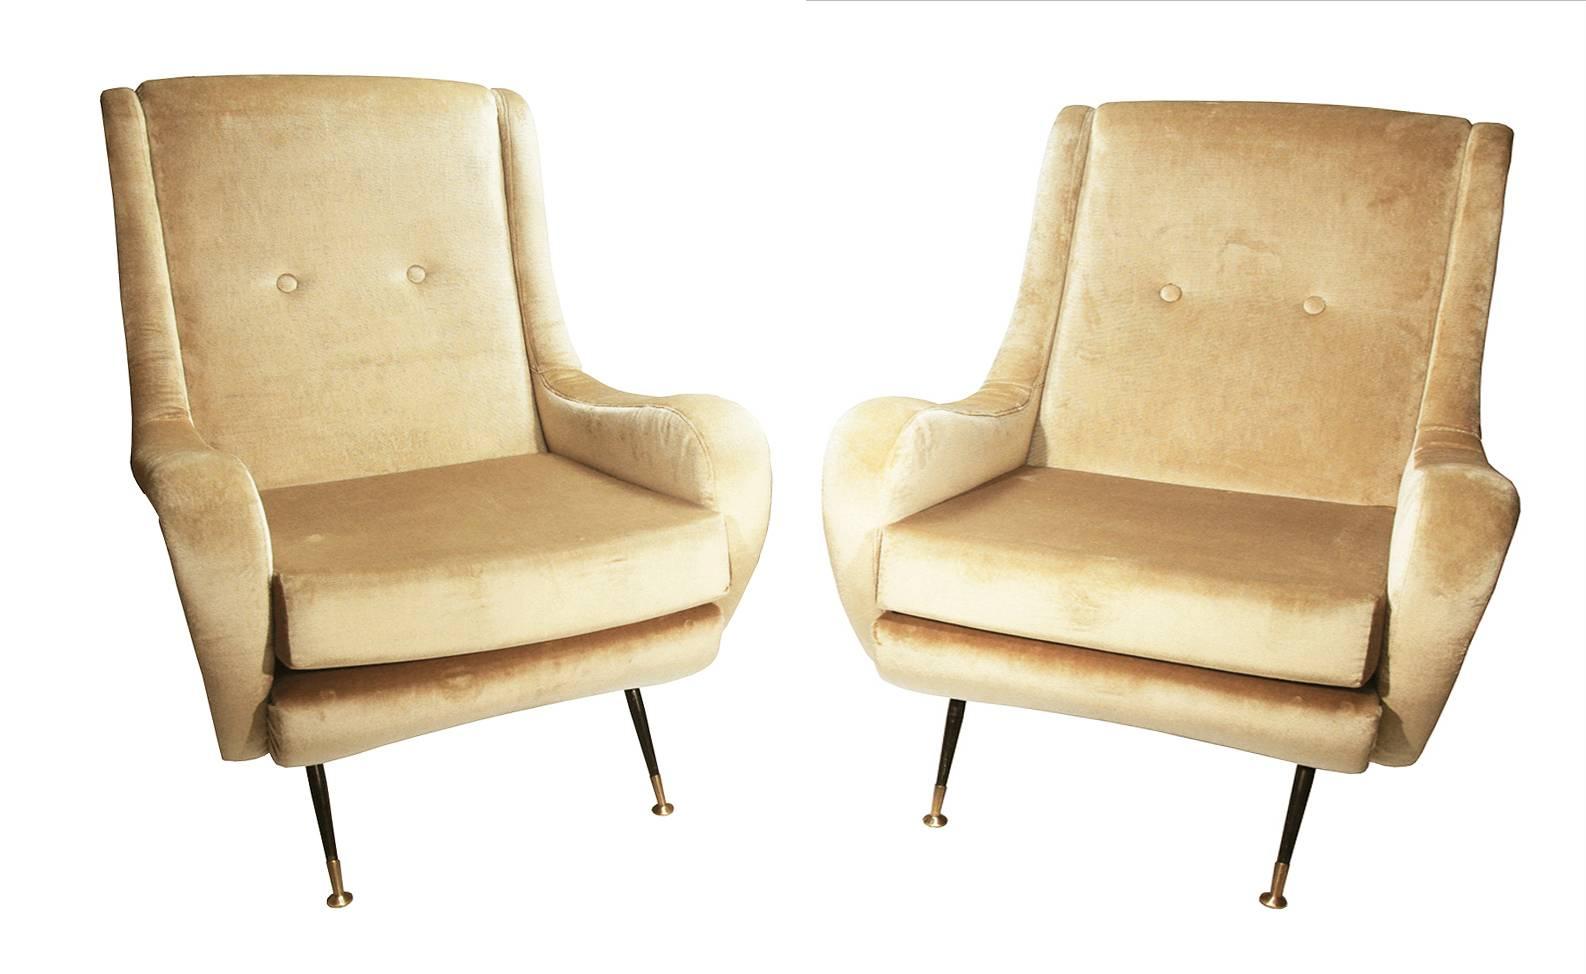 An elegant pair of Gigi Radice armchairs reupholstered in a luxurious champagne colored velvet, ebonized tapered legs ending in bronze caps.